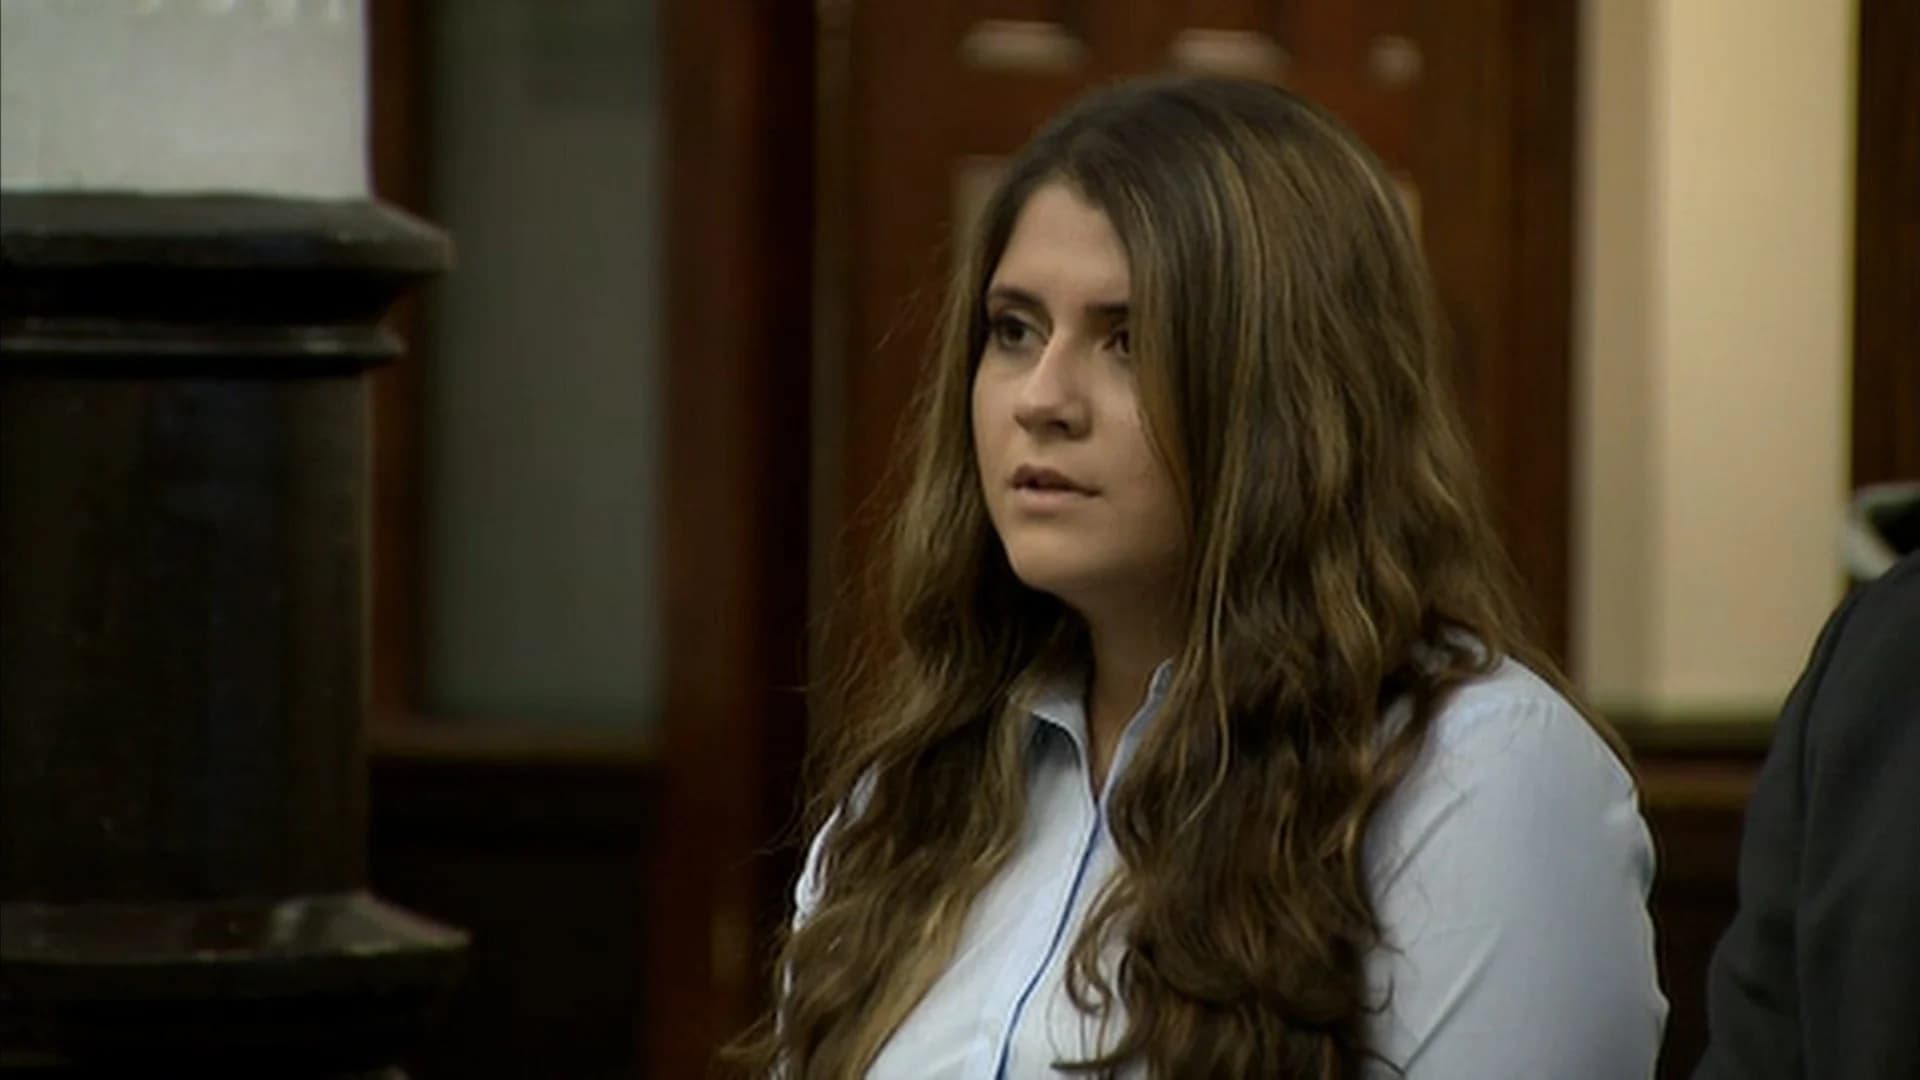 Former SHU student accused of lying about rape appears in court